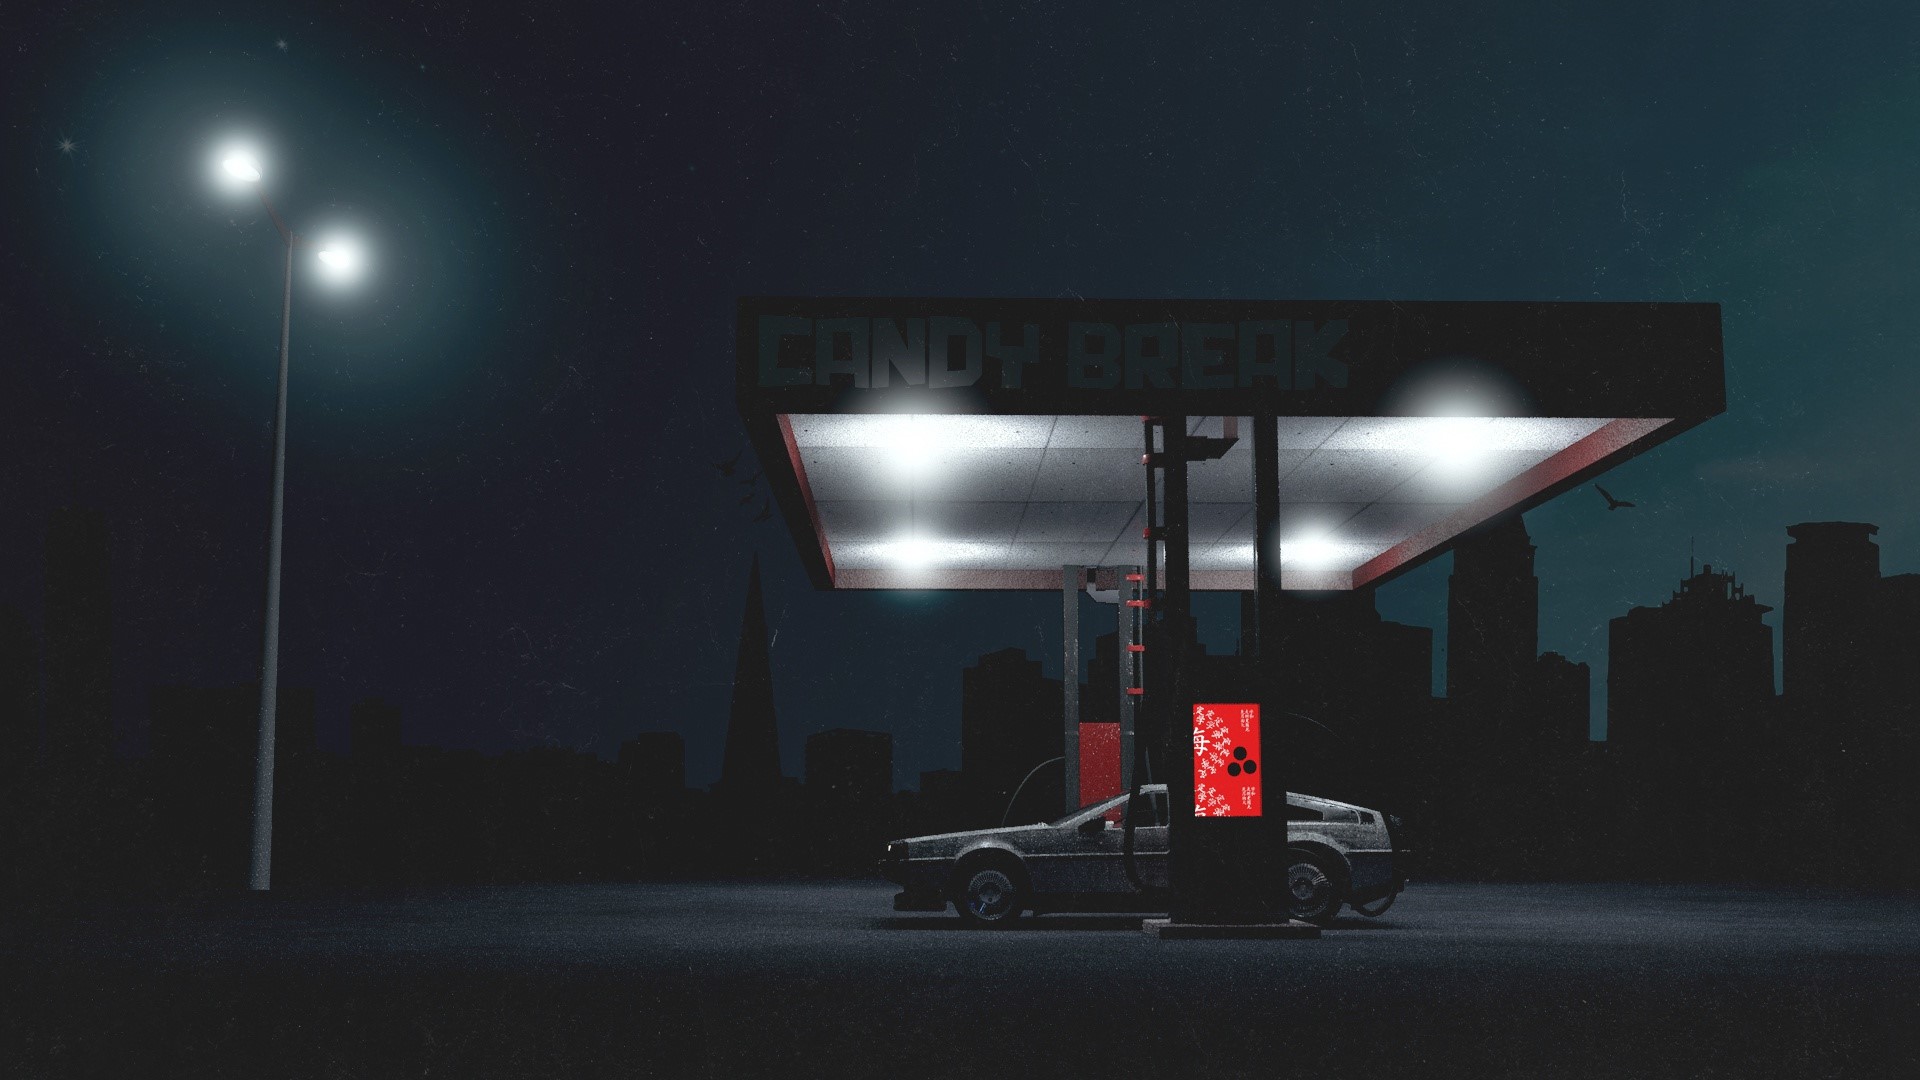 HD Wallpaper for theme: gas stations HD wallpaper, background